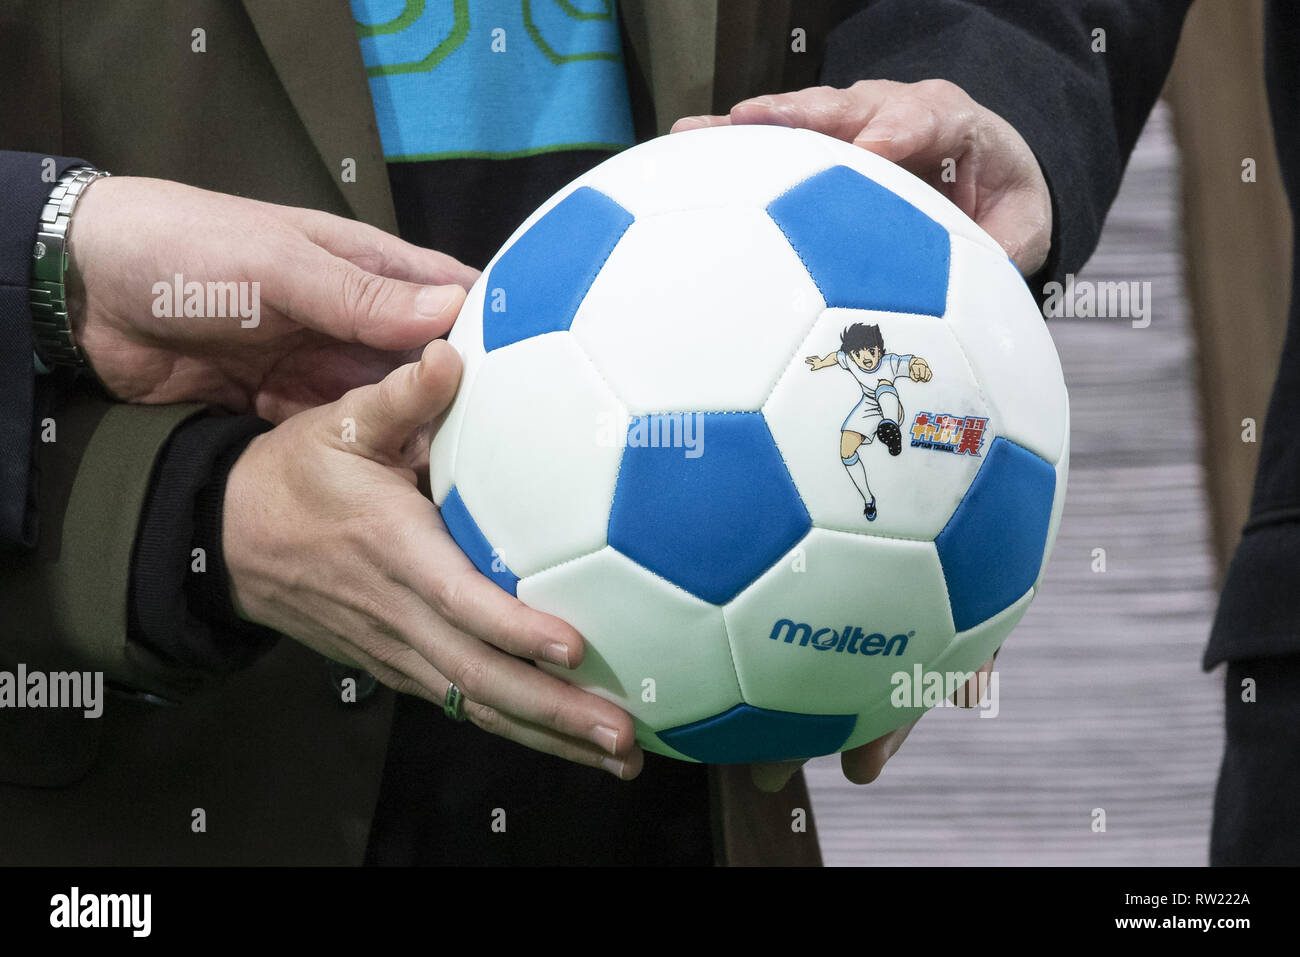 March 4, 2019 - Tokyo, Japan - Barcelona legend playmaker Andres Iniesta and other guests hold a football soccer ball with the image of Captain Tsubasa during an opening ceremony for the Yotsugi Station and Captain Tsubasa project. Iniesta was named Official Collaborator for the Yotsugi Station and Captain Tsubasa project, which aims to promote the tourism in the ward of Katsushika, the hometown of Yoichi Takahashi author of the Captain Tsubasa manga. Iniesta who is playing for the Japanese football club Vissel Kobe also visited the Yotsugi Station to see Captain Tsubasa manga characters decor Stock Photo